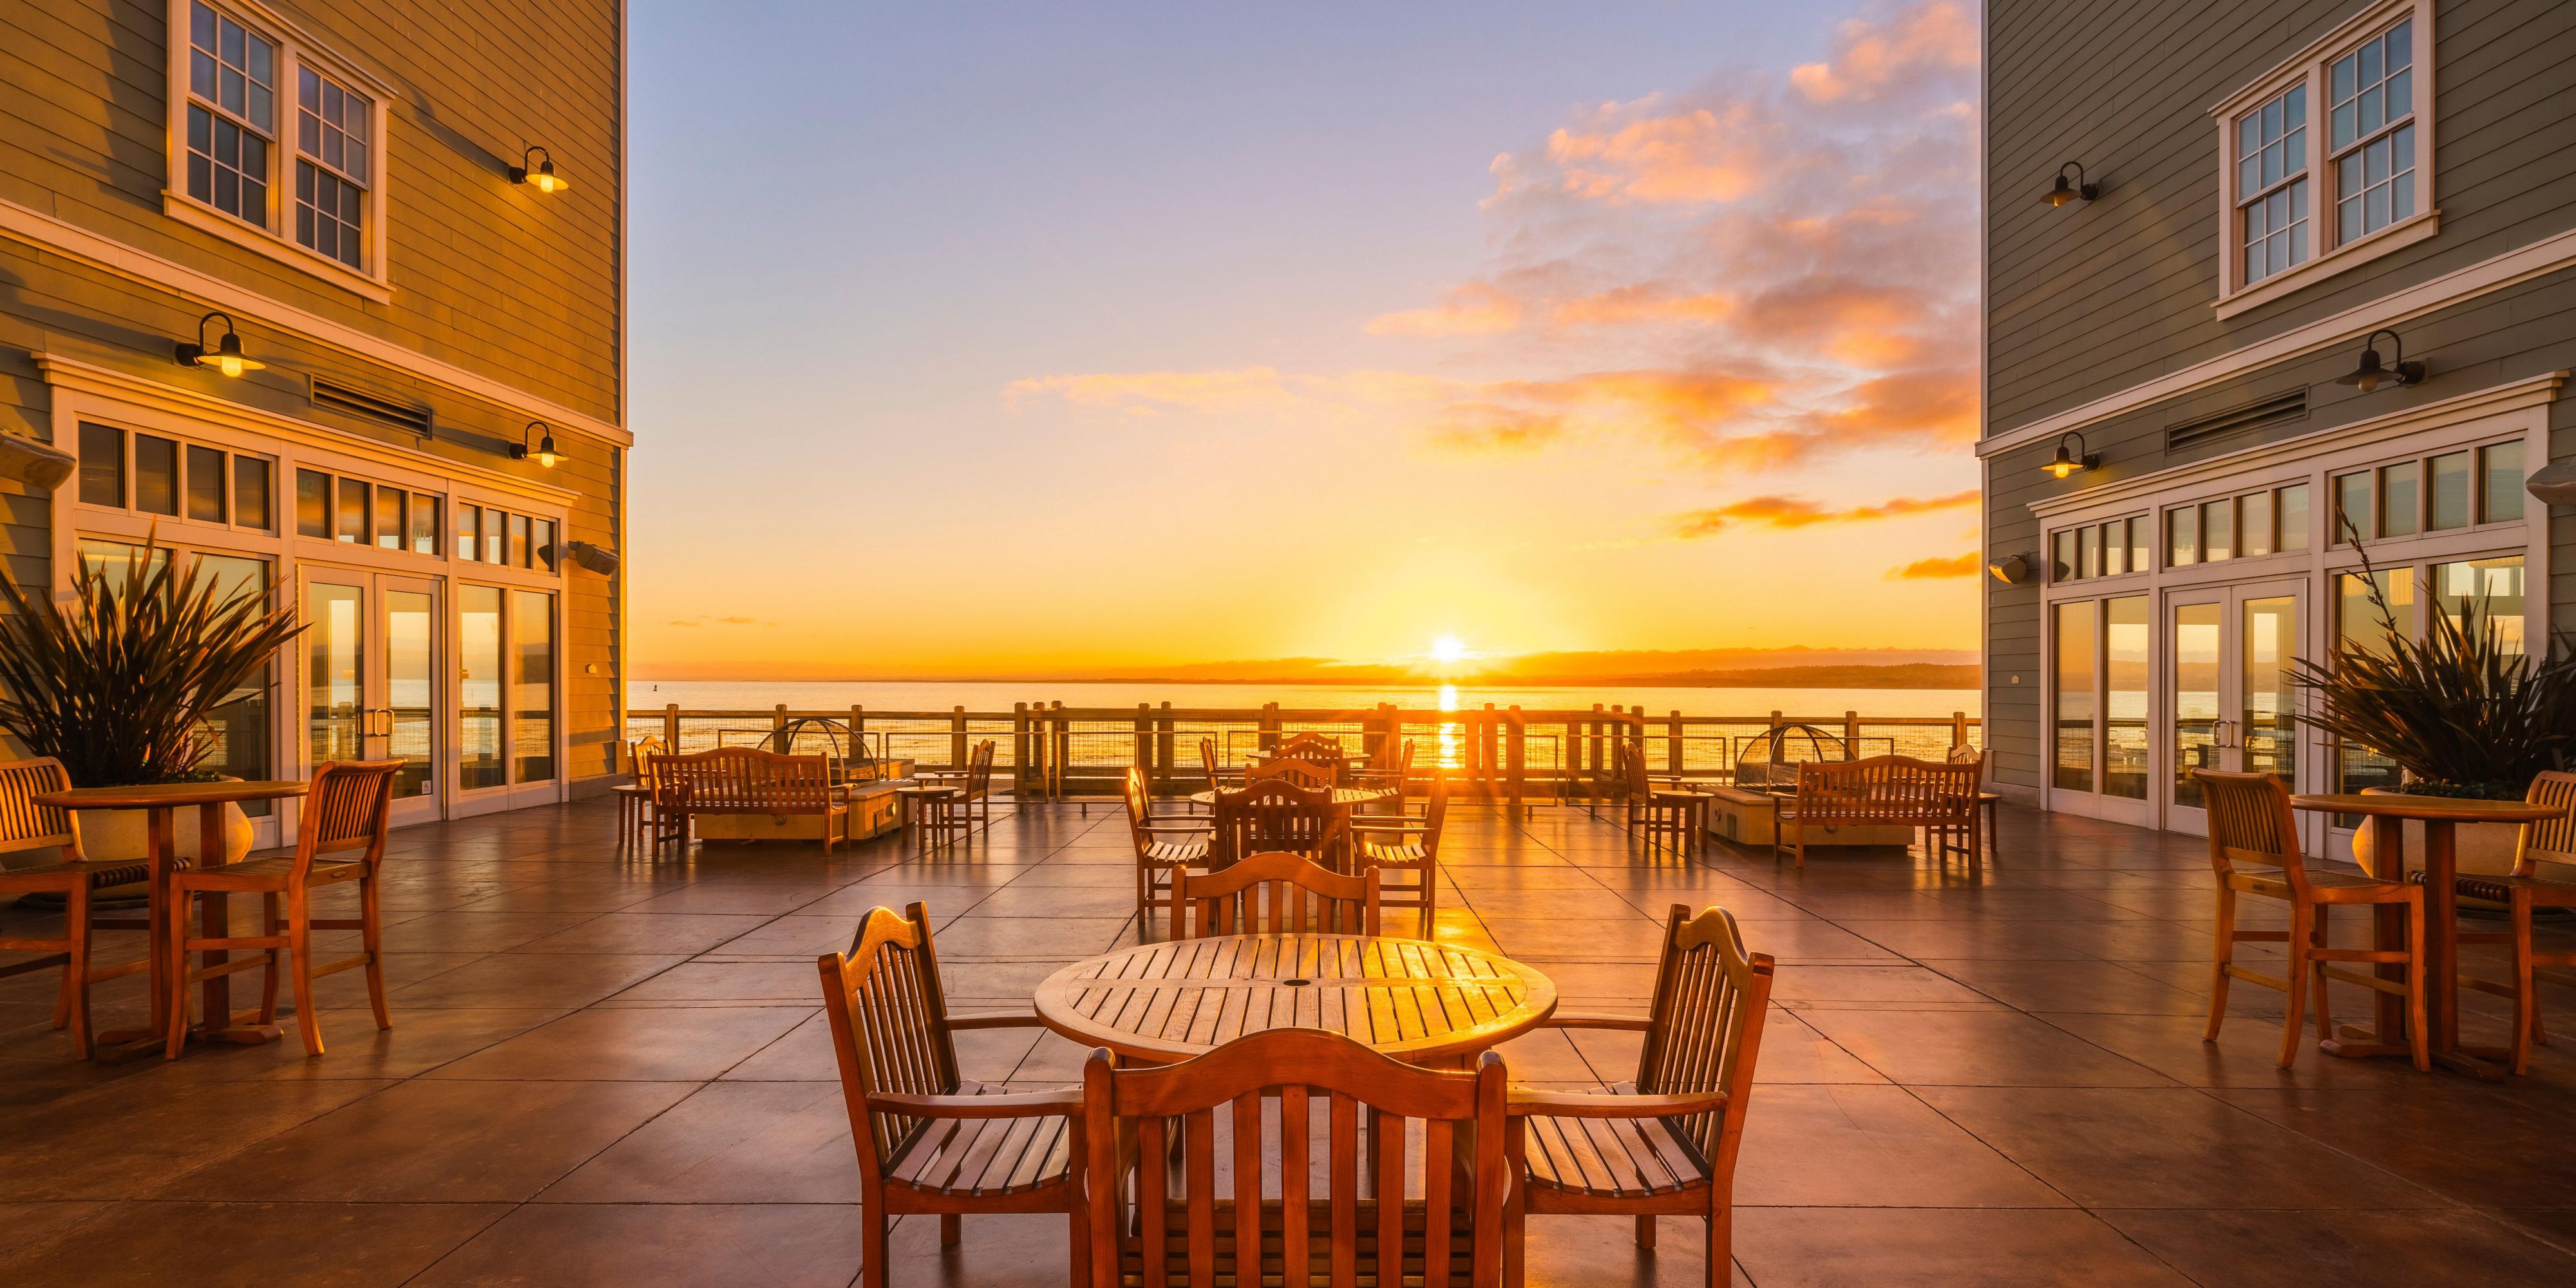 Stroll out on the hotel's boardwalk and pier leading up to the Bay, and discover the incredible views of the Monterey Bay National Marine Sanctuary. Immerse yourself in the outdoors by walking, jogging, or cycling on the Monterey Bay Coastal Recreation Trail along the coastline.